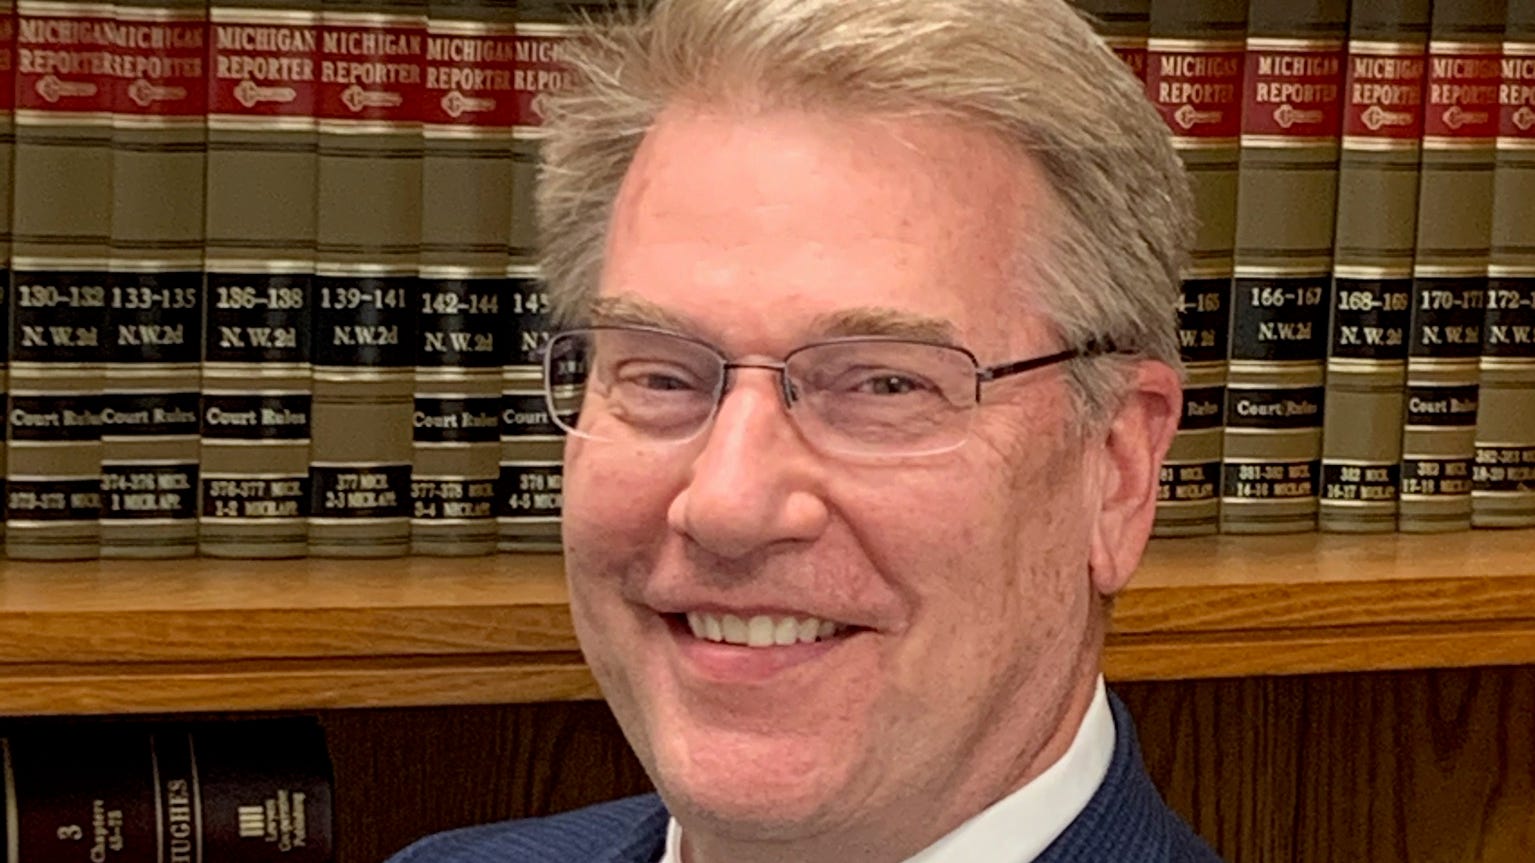 Thomas Tomko, who was named the new Macomb County Public Defender on October 16, 2020.